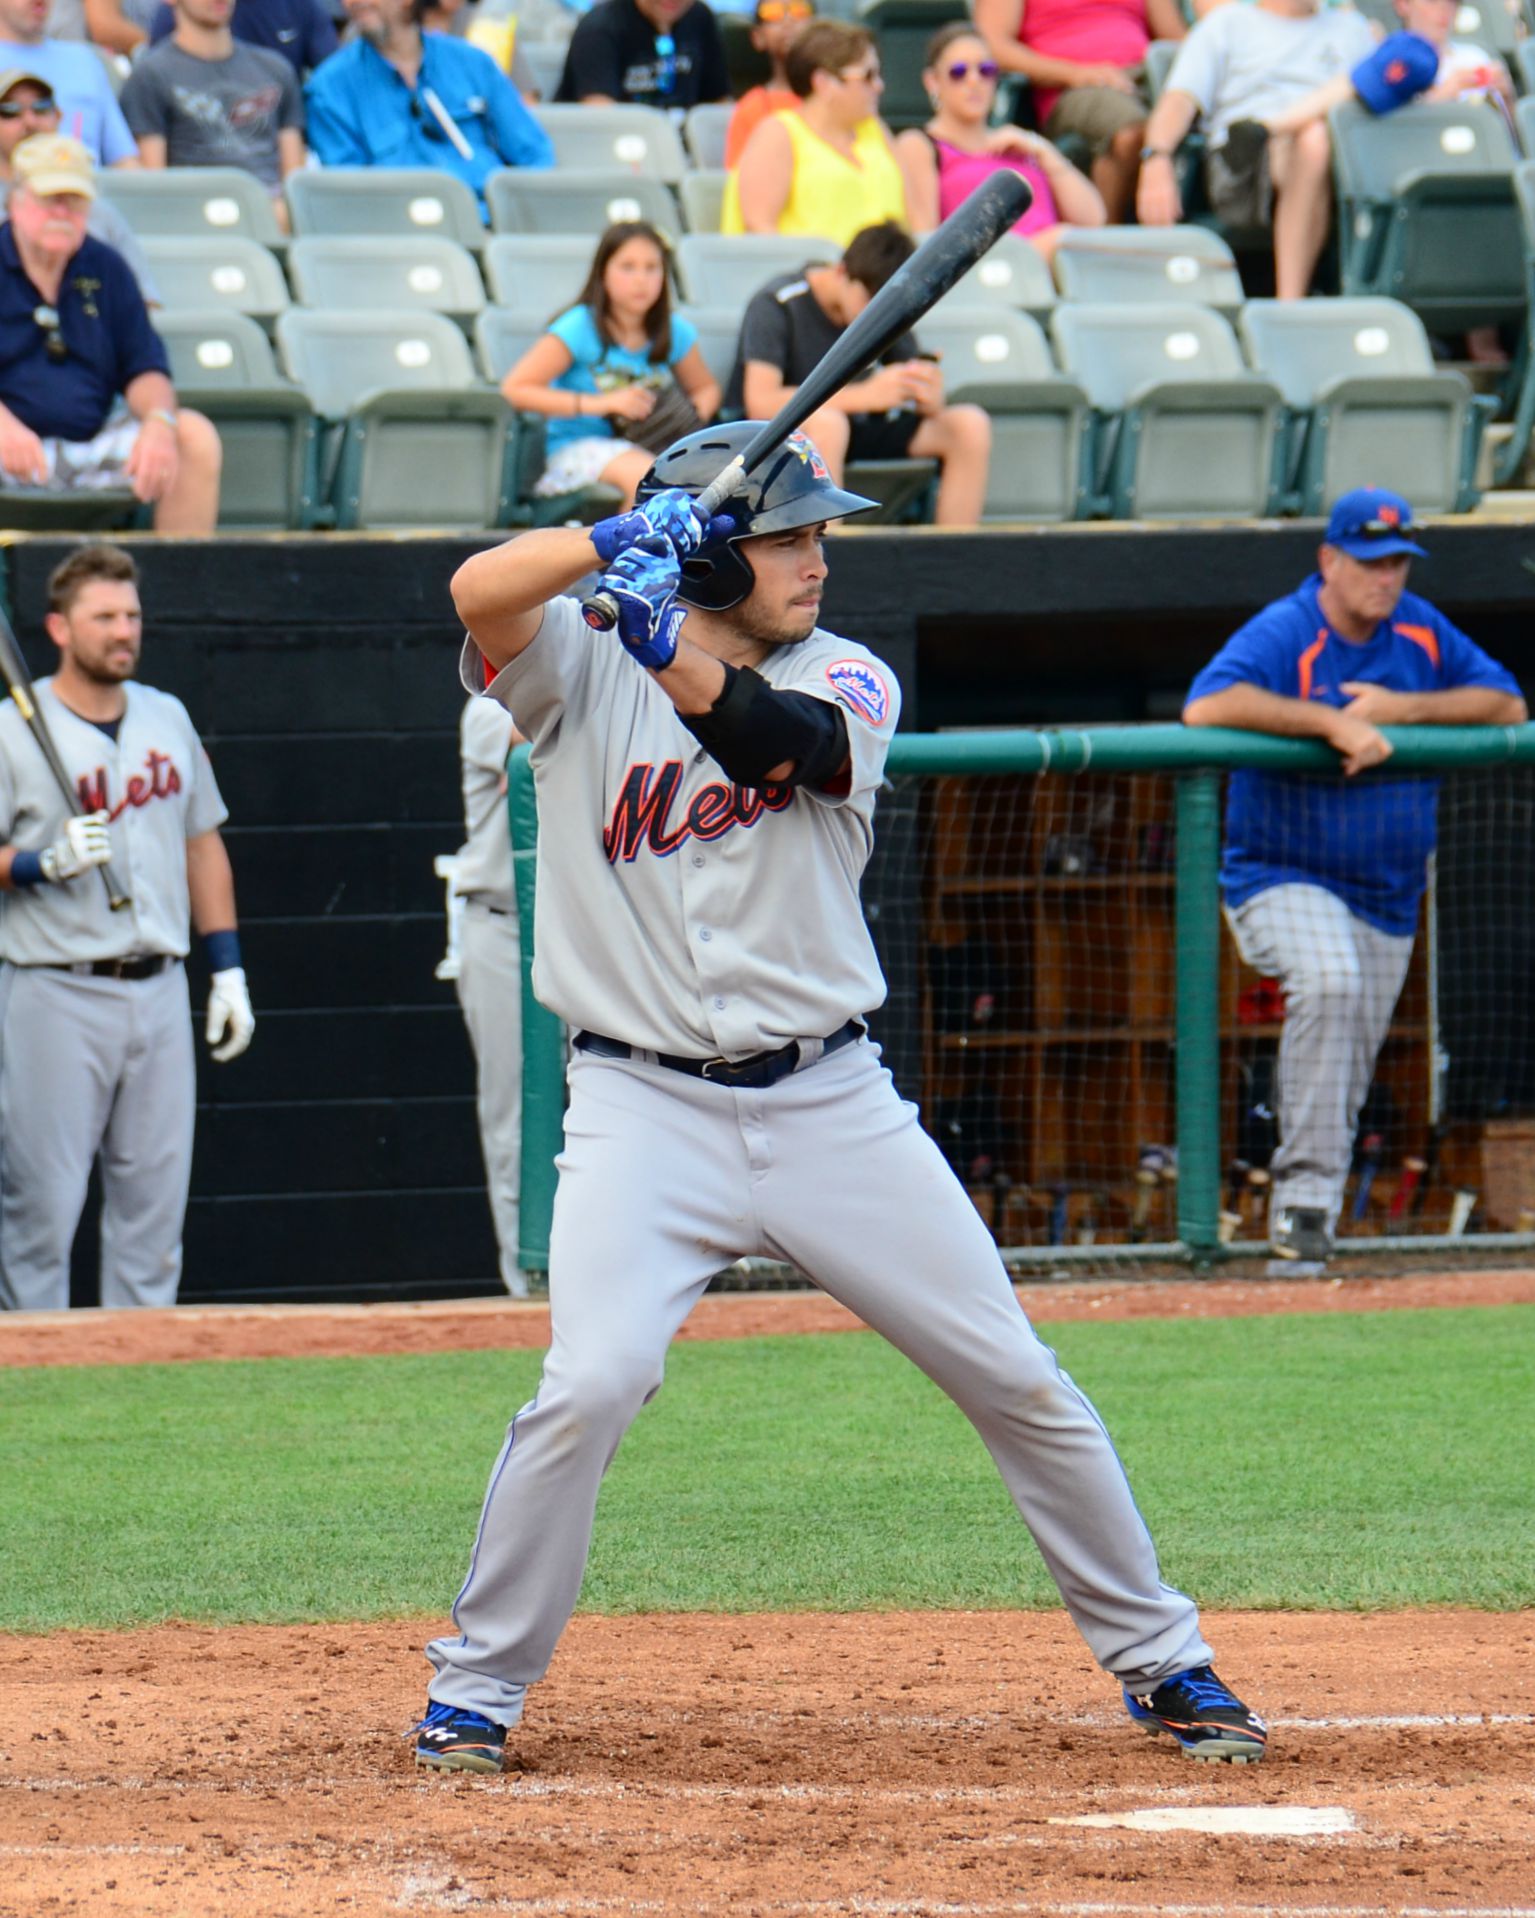 a batter prepares for the next pitch during a game